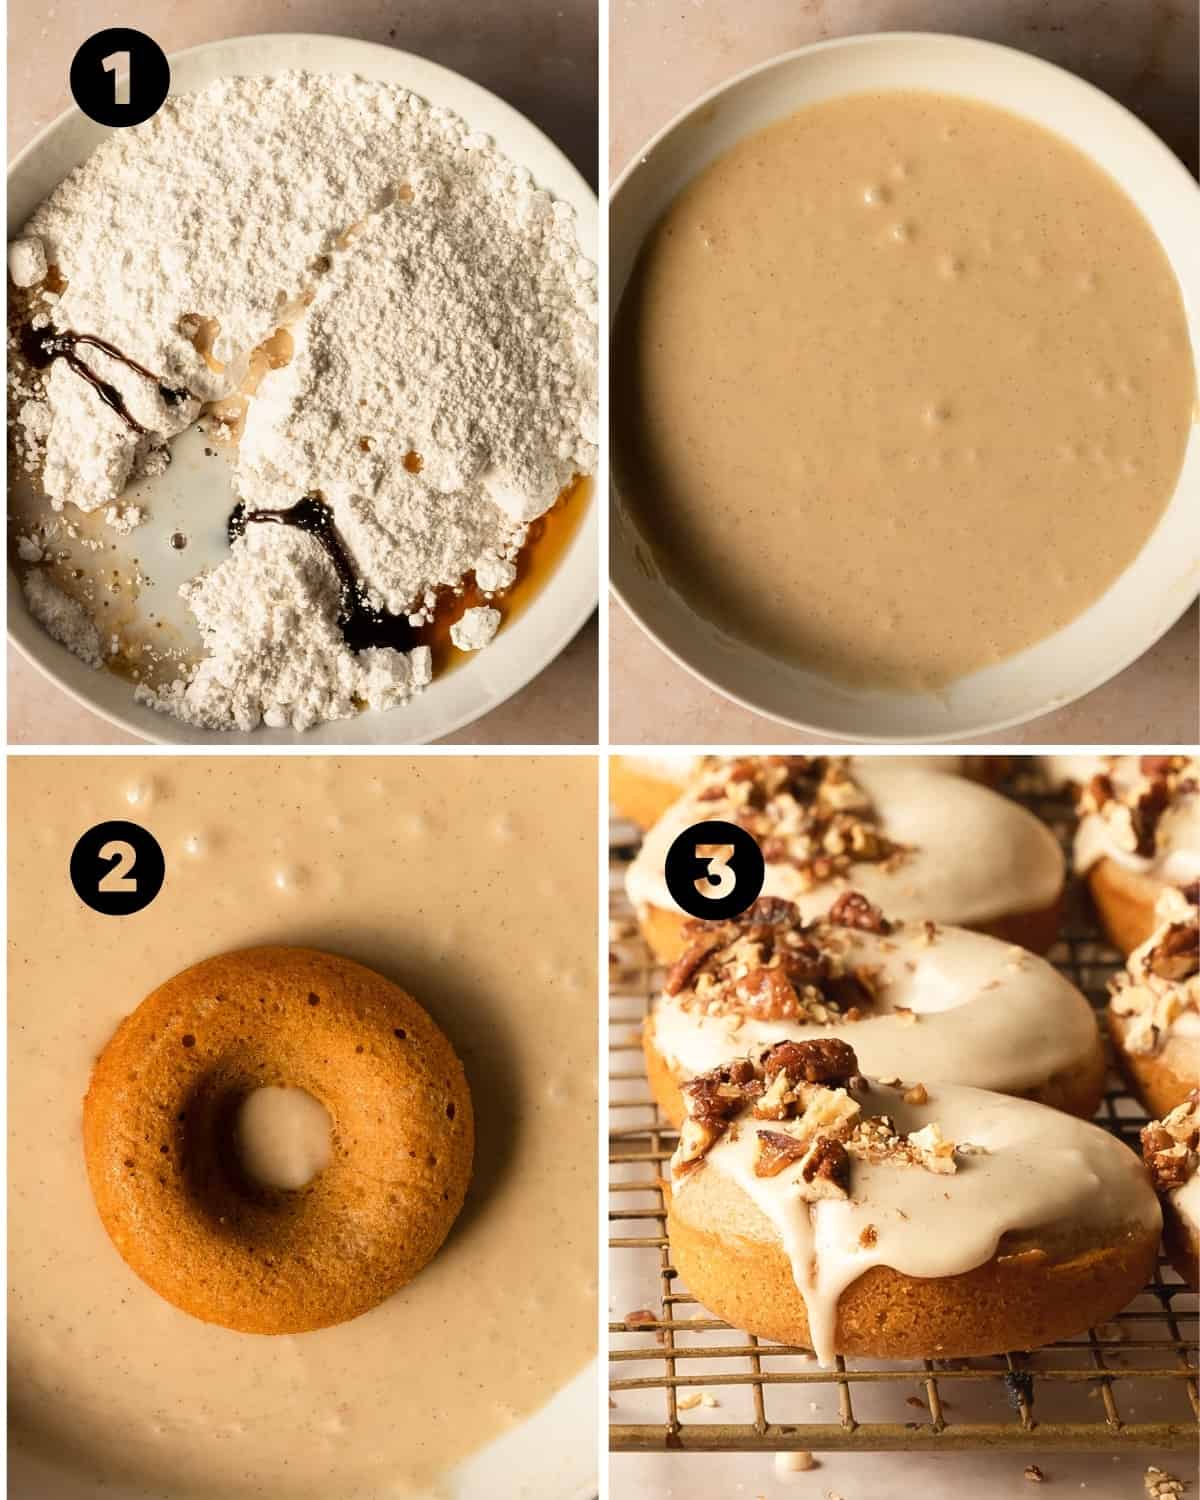 Whisk the powdered sugar, maple syrup, vanilla extract and milk togethe until well combined. Dip the maple donuts in the glaze and top with chopped pecans.